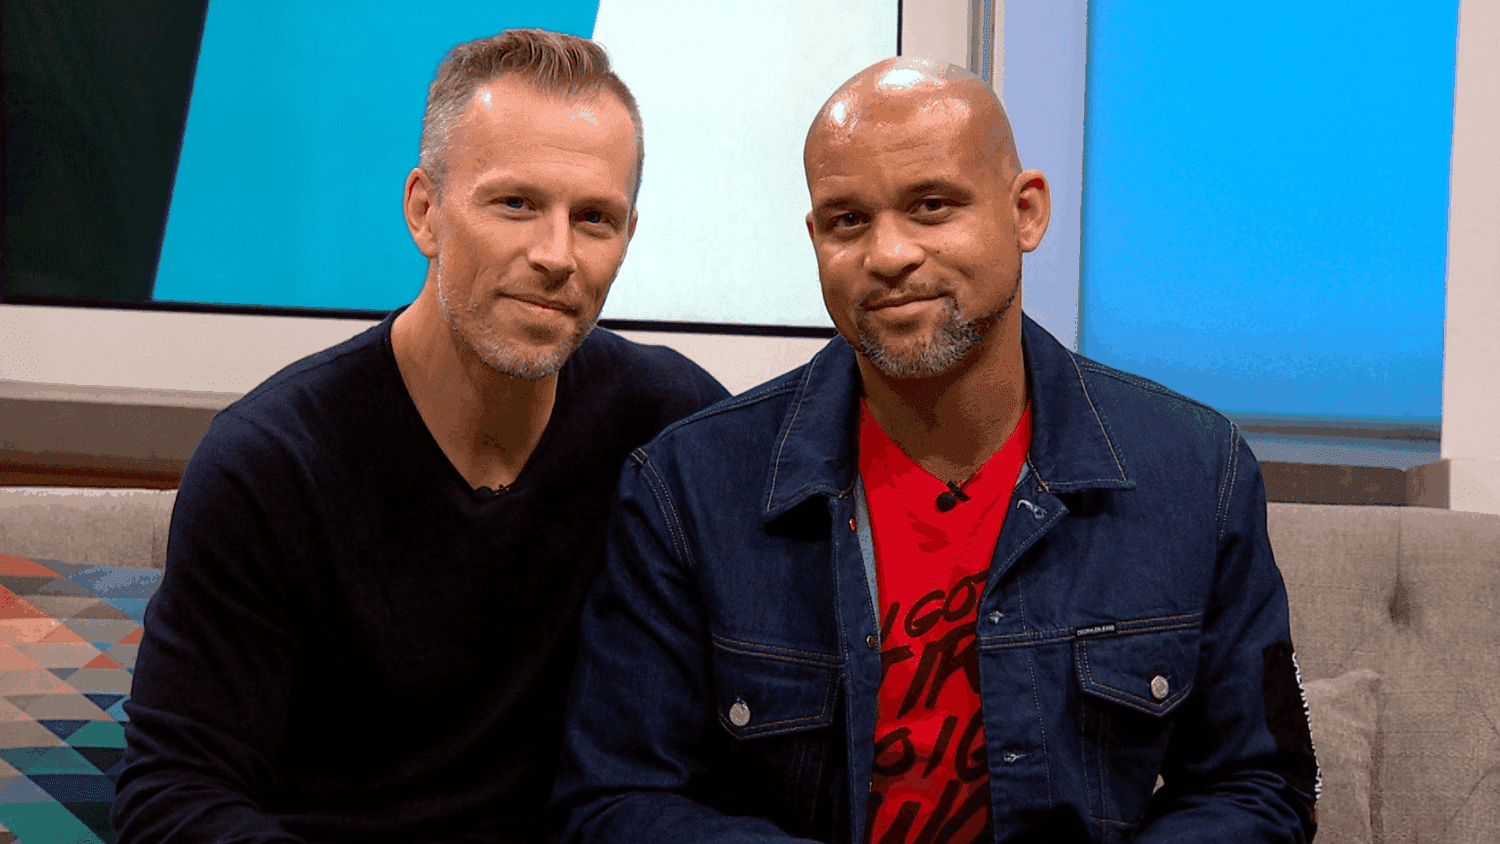 Insanity Founder Shaun T Opens Up about Twin Life After 12 Pregnancy  Attempts With 5 Surrogates | Parents